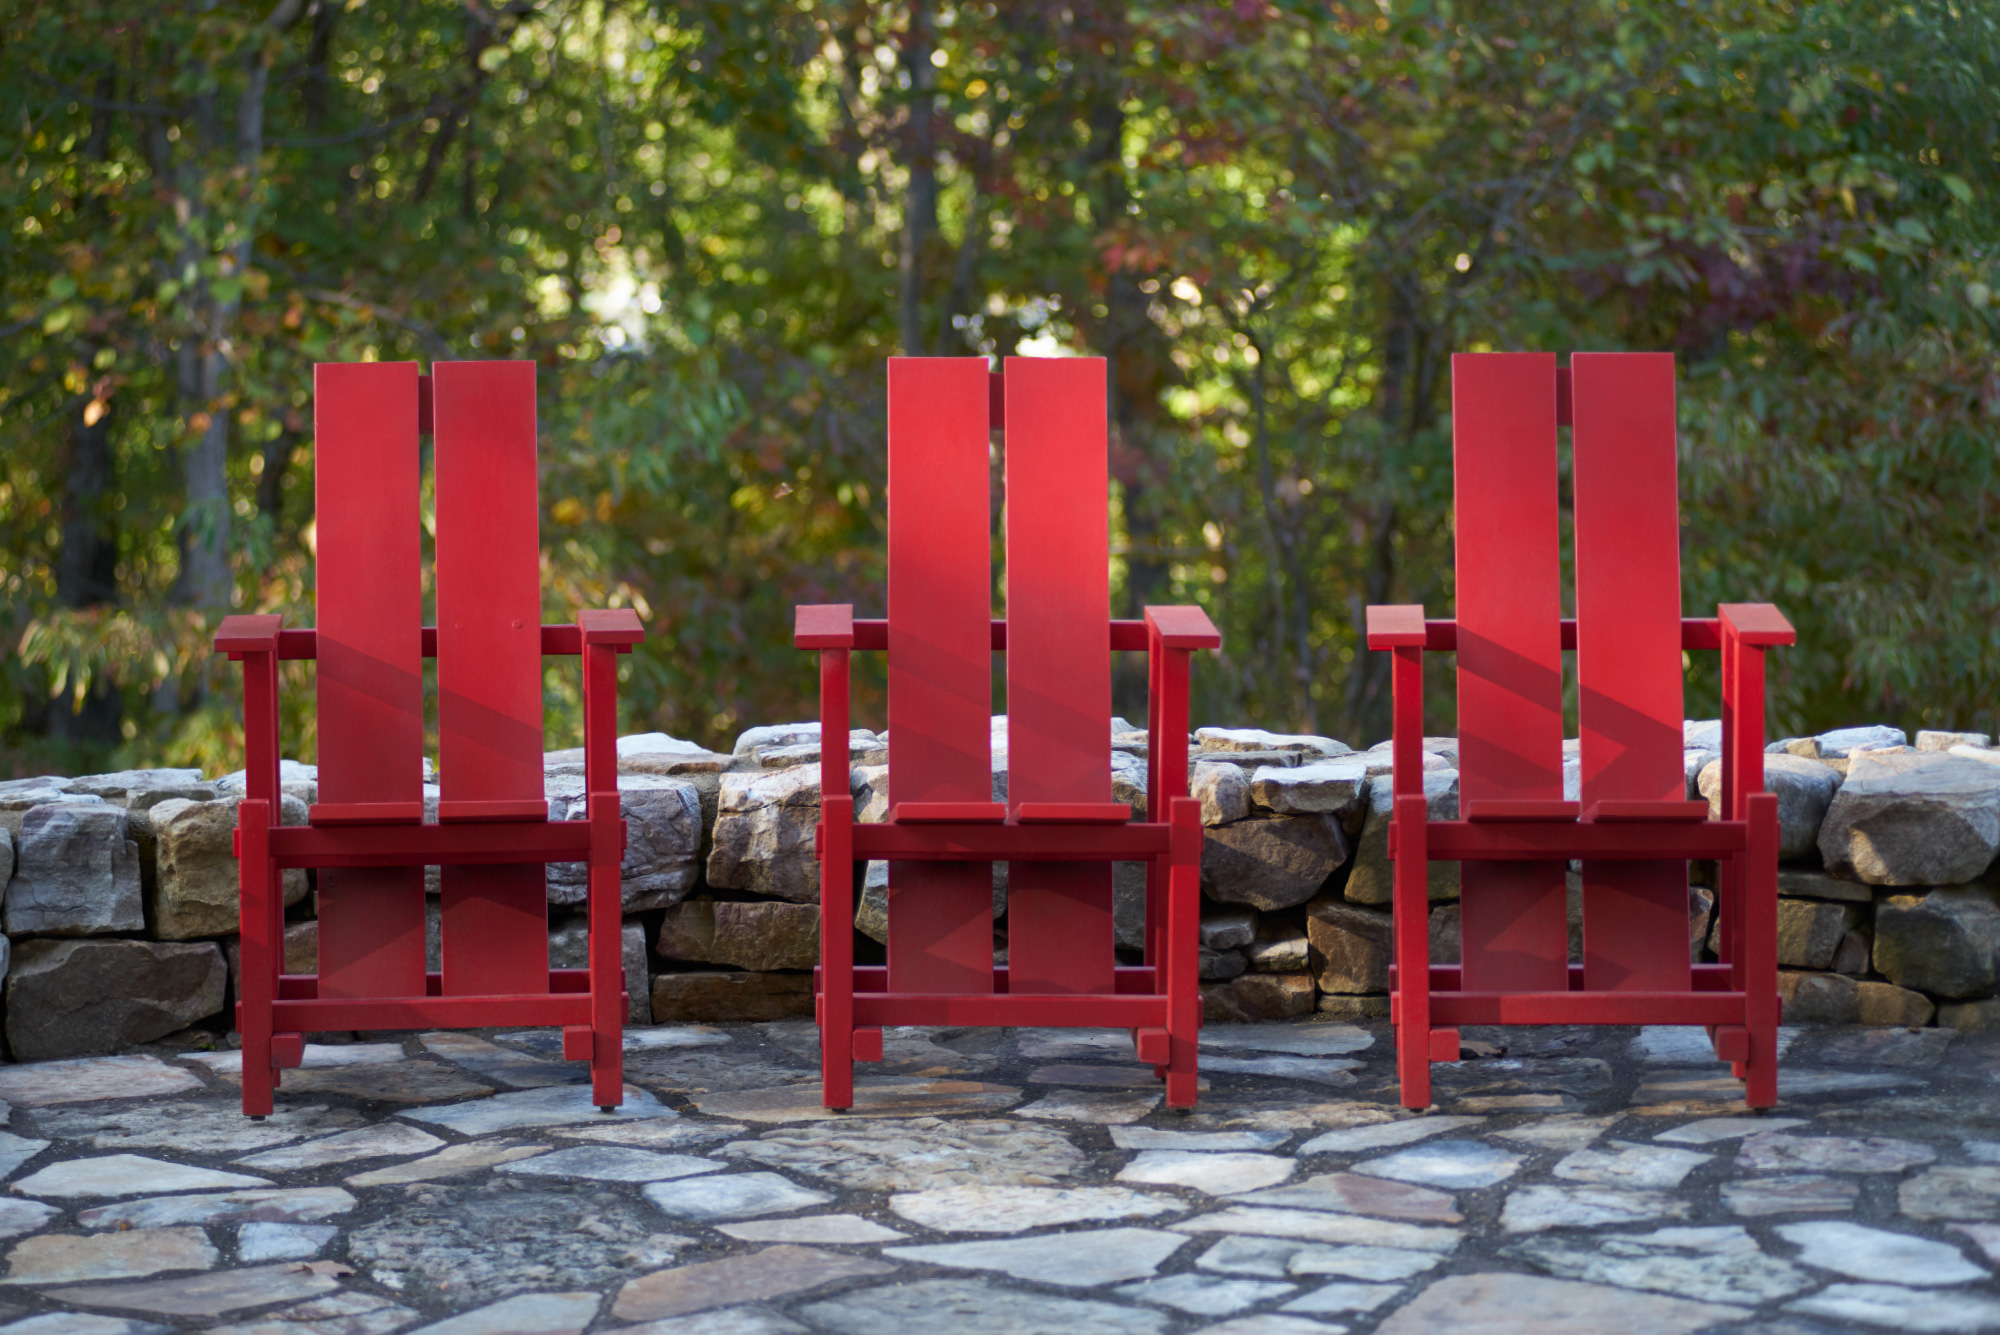 A photo of three red-painted Adirondack chairs at High Ground Park.